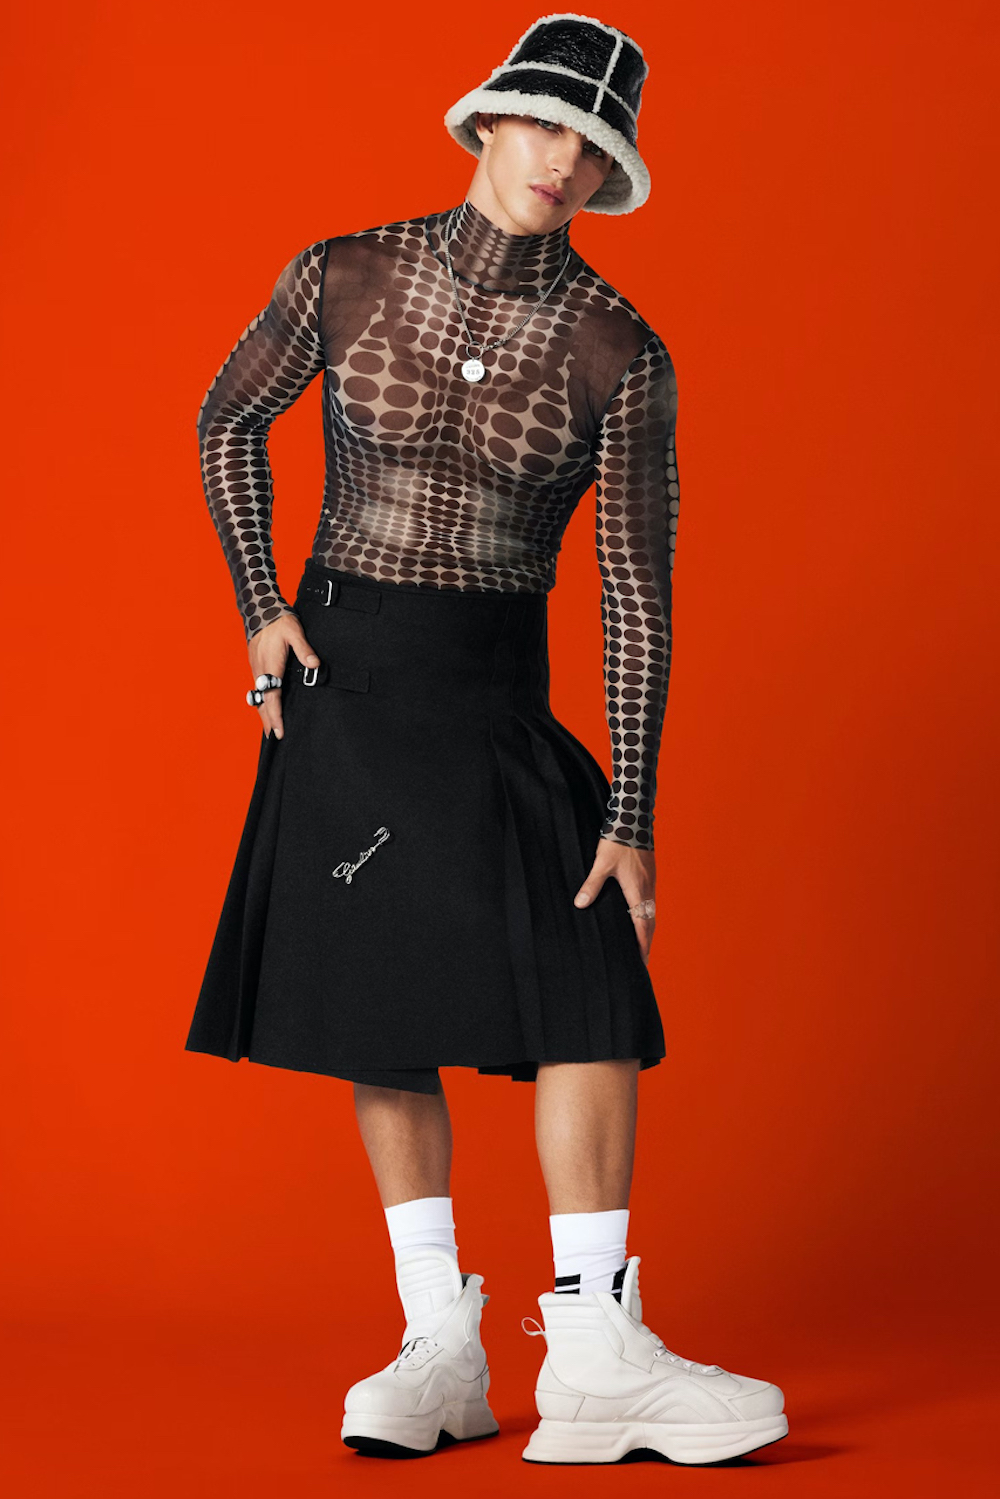 Jean Paul Gaultier Debuts 90s-Centric “Cyber Collection” – PAUSE